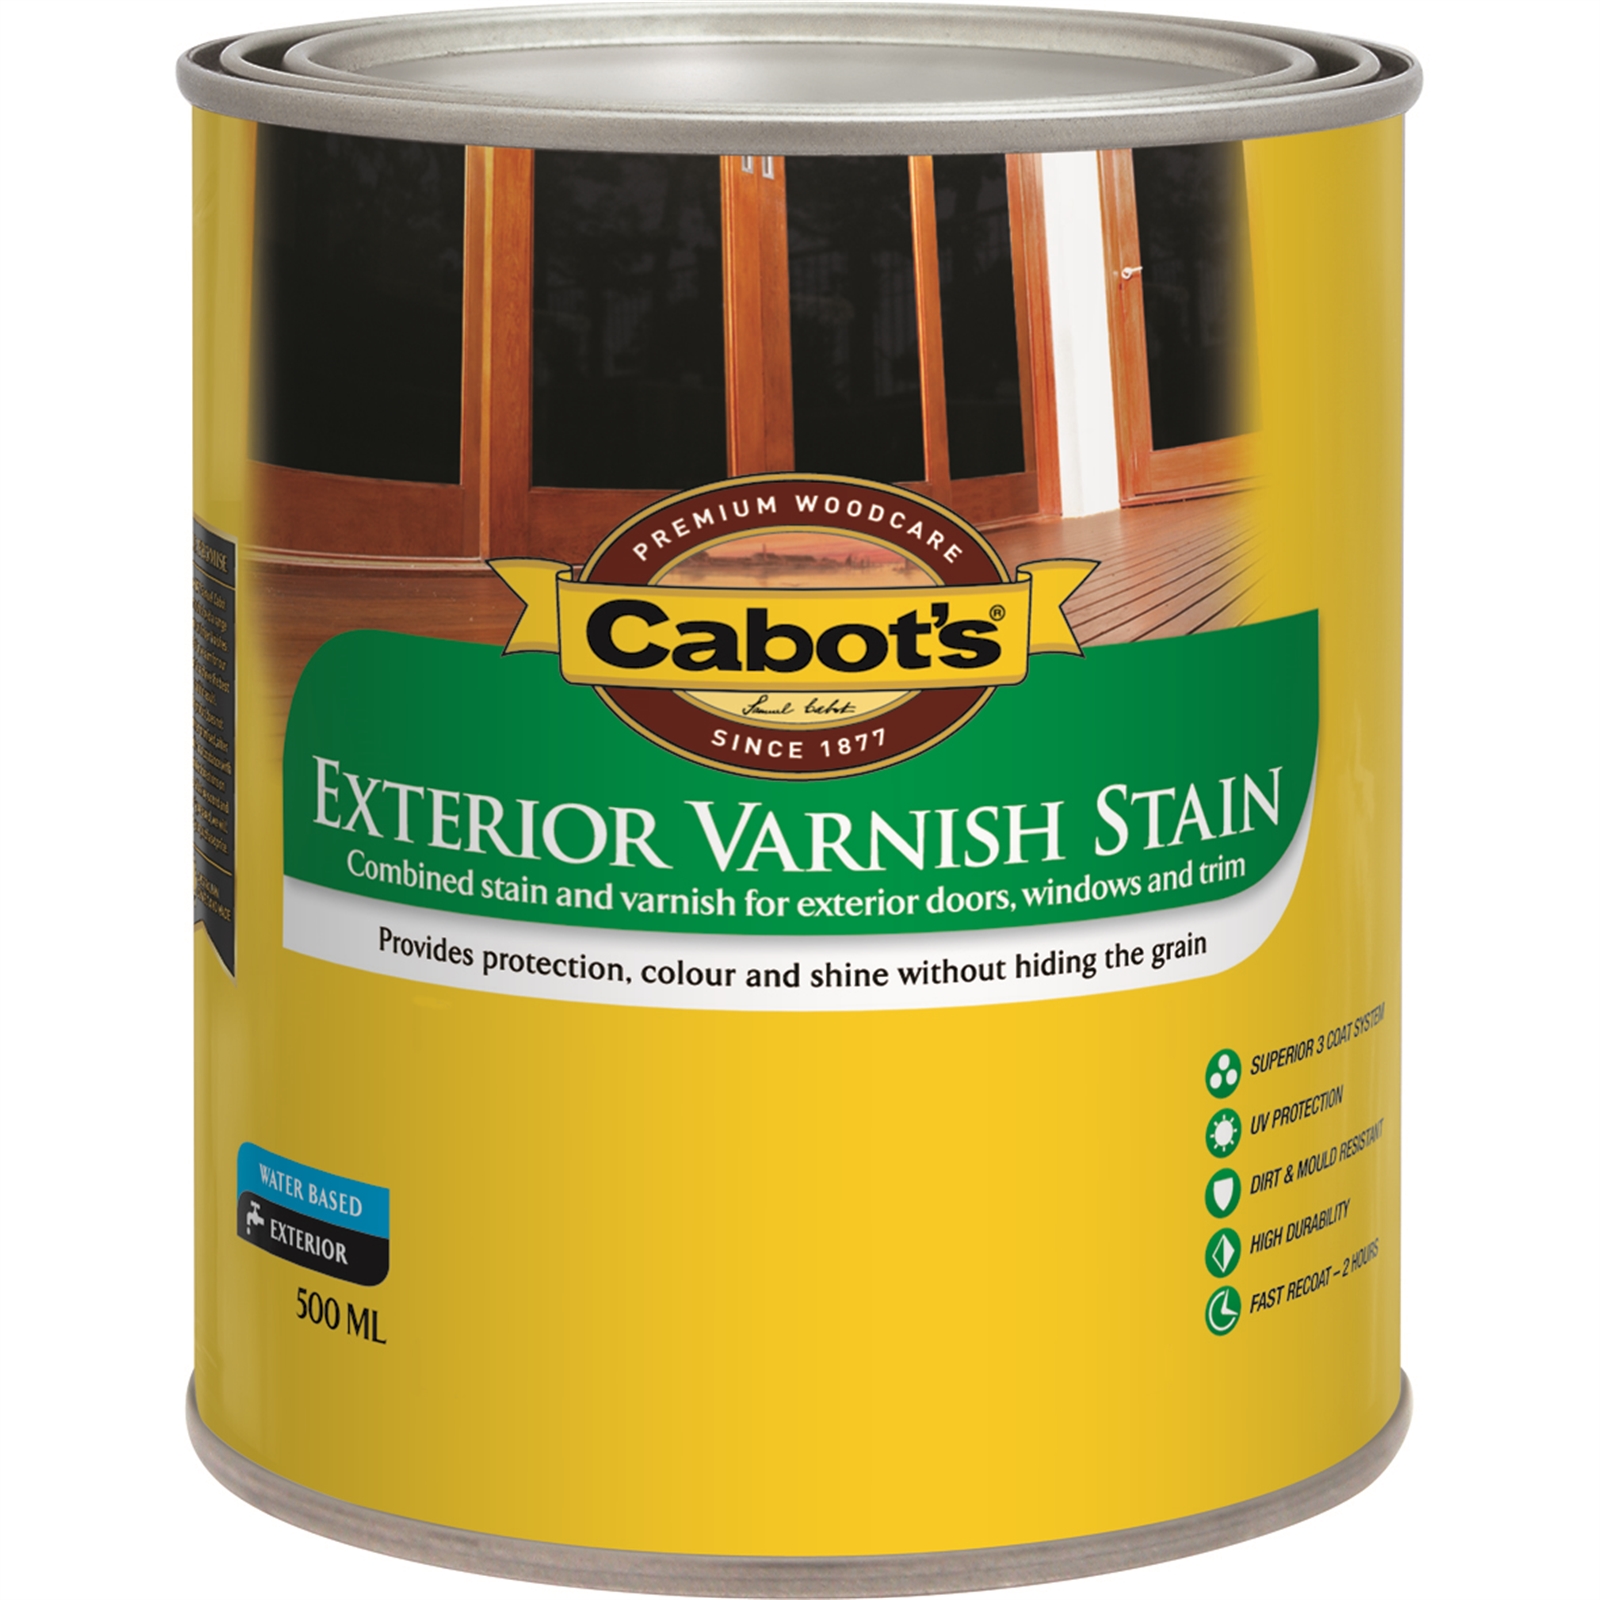 Cabot's 500ml Maple Exterior Varnish Stain